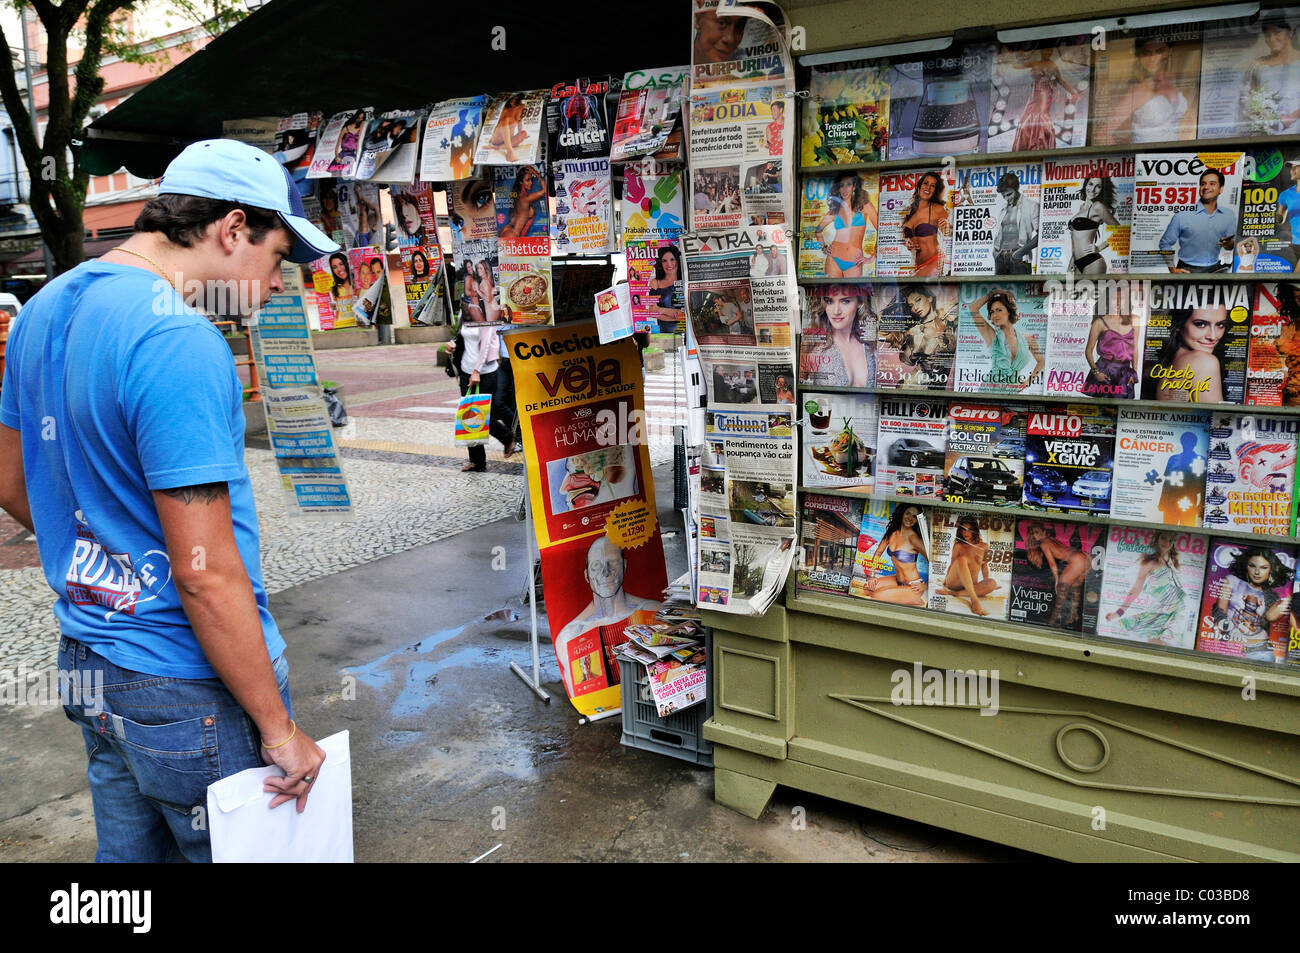 Man looking at magazines and newspapers at a newspaper kiosk, Petropolis, Rio de Janeiro, Brazil, South America Stock Photo